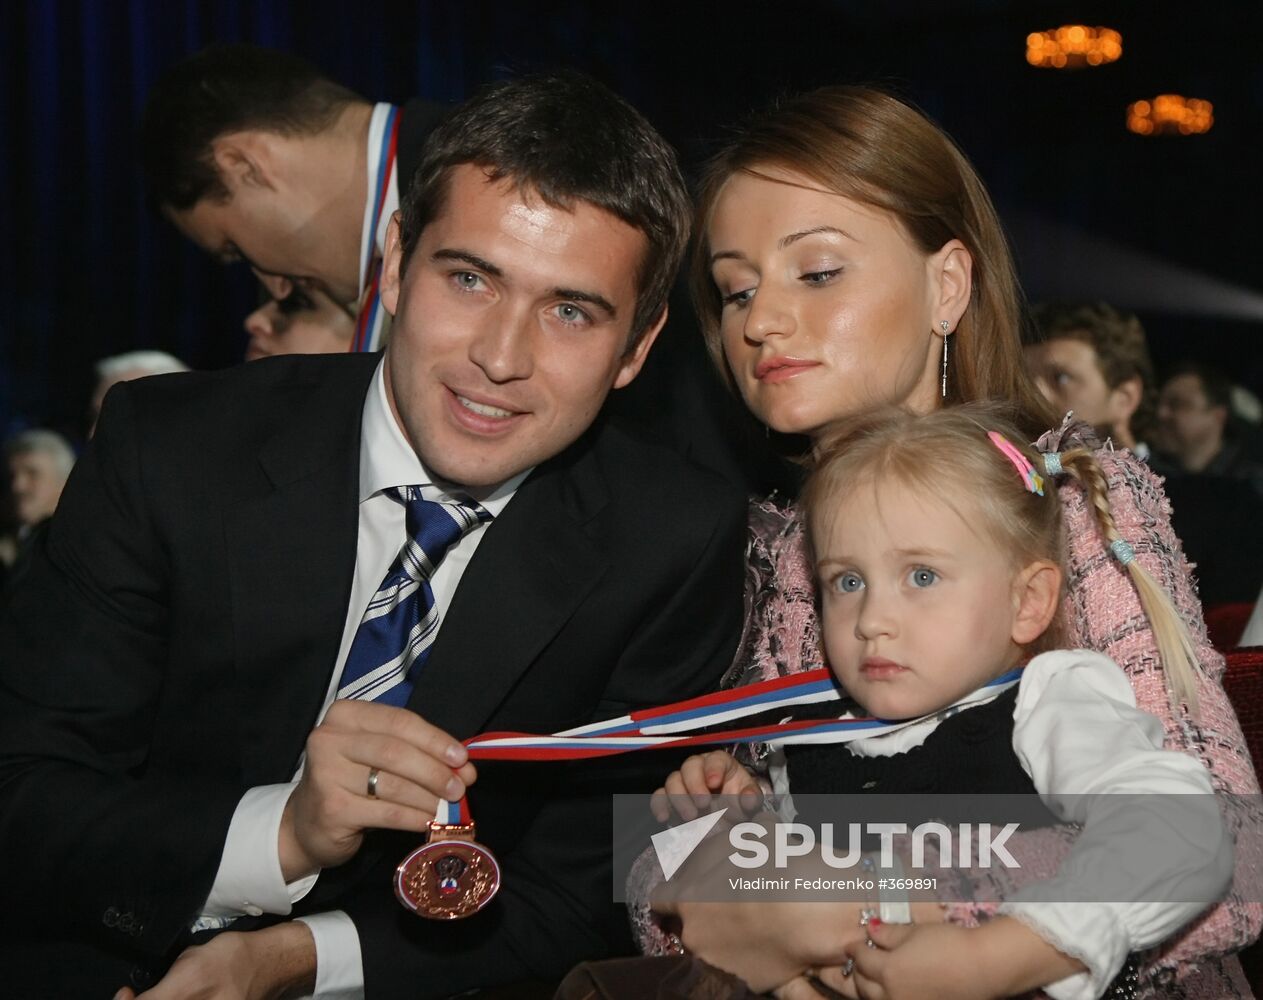 Dinamo Moscow players awarded bronze medals